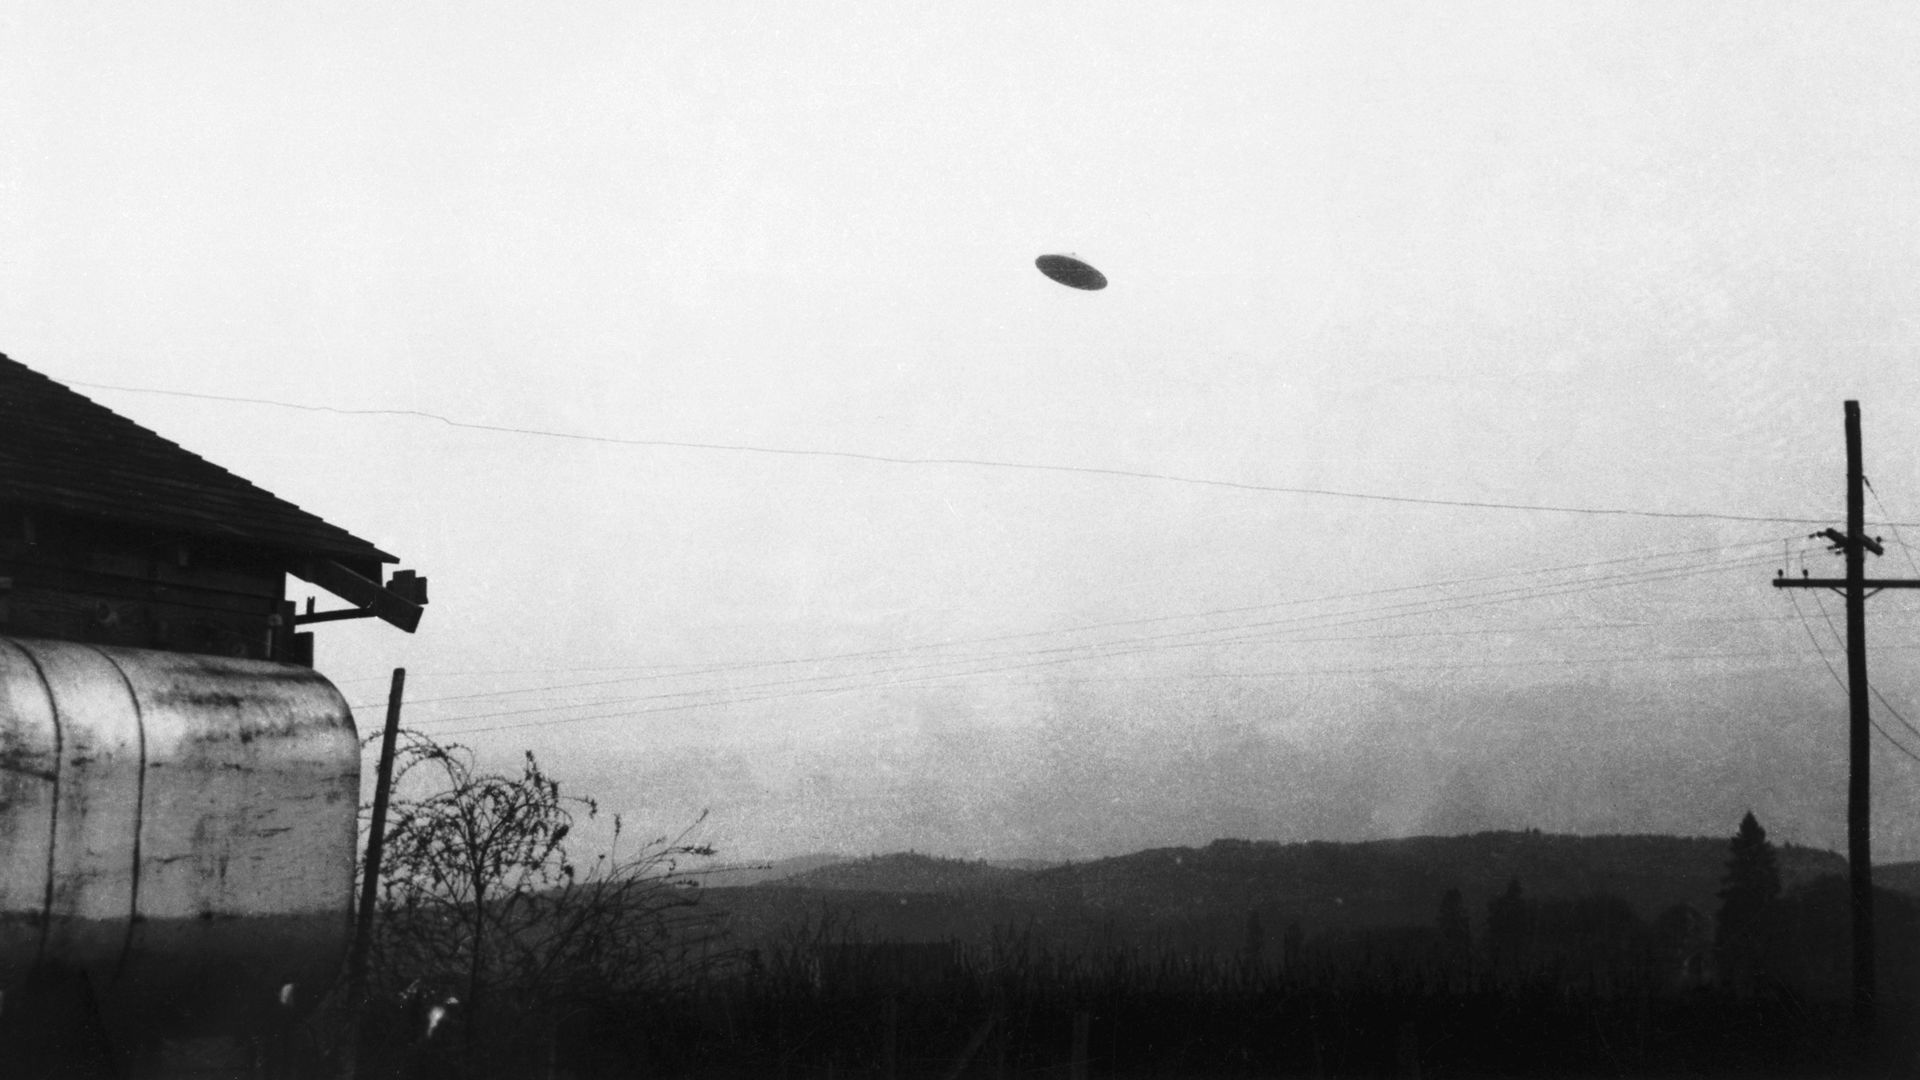 Read More: How the CIA Tried to Quell UFO Panic